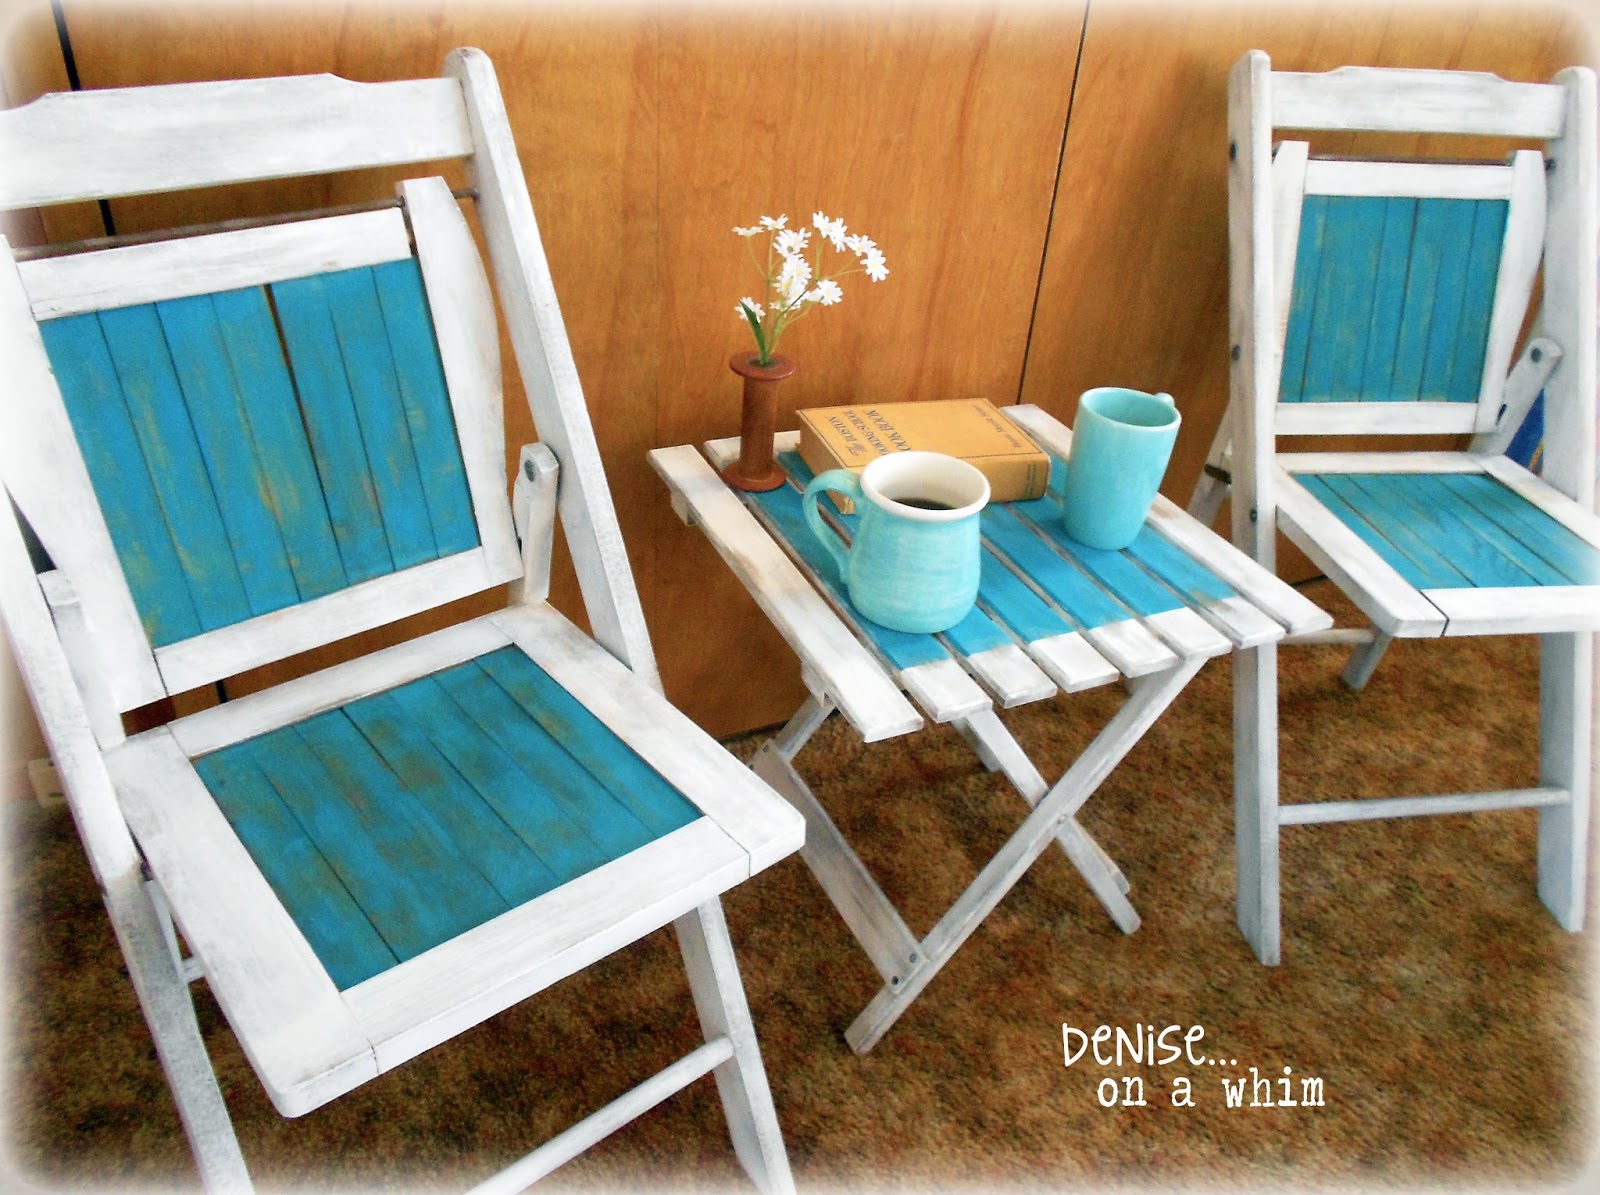 Lovely set of vintage wooden folding chairs and slotted table via http://deniseonawhim.blogspot.com